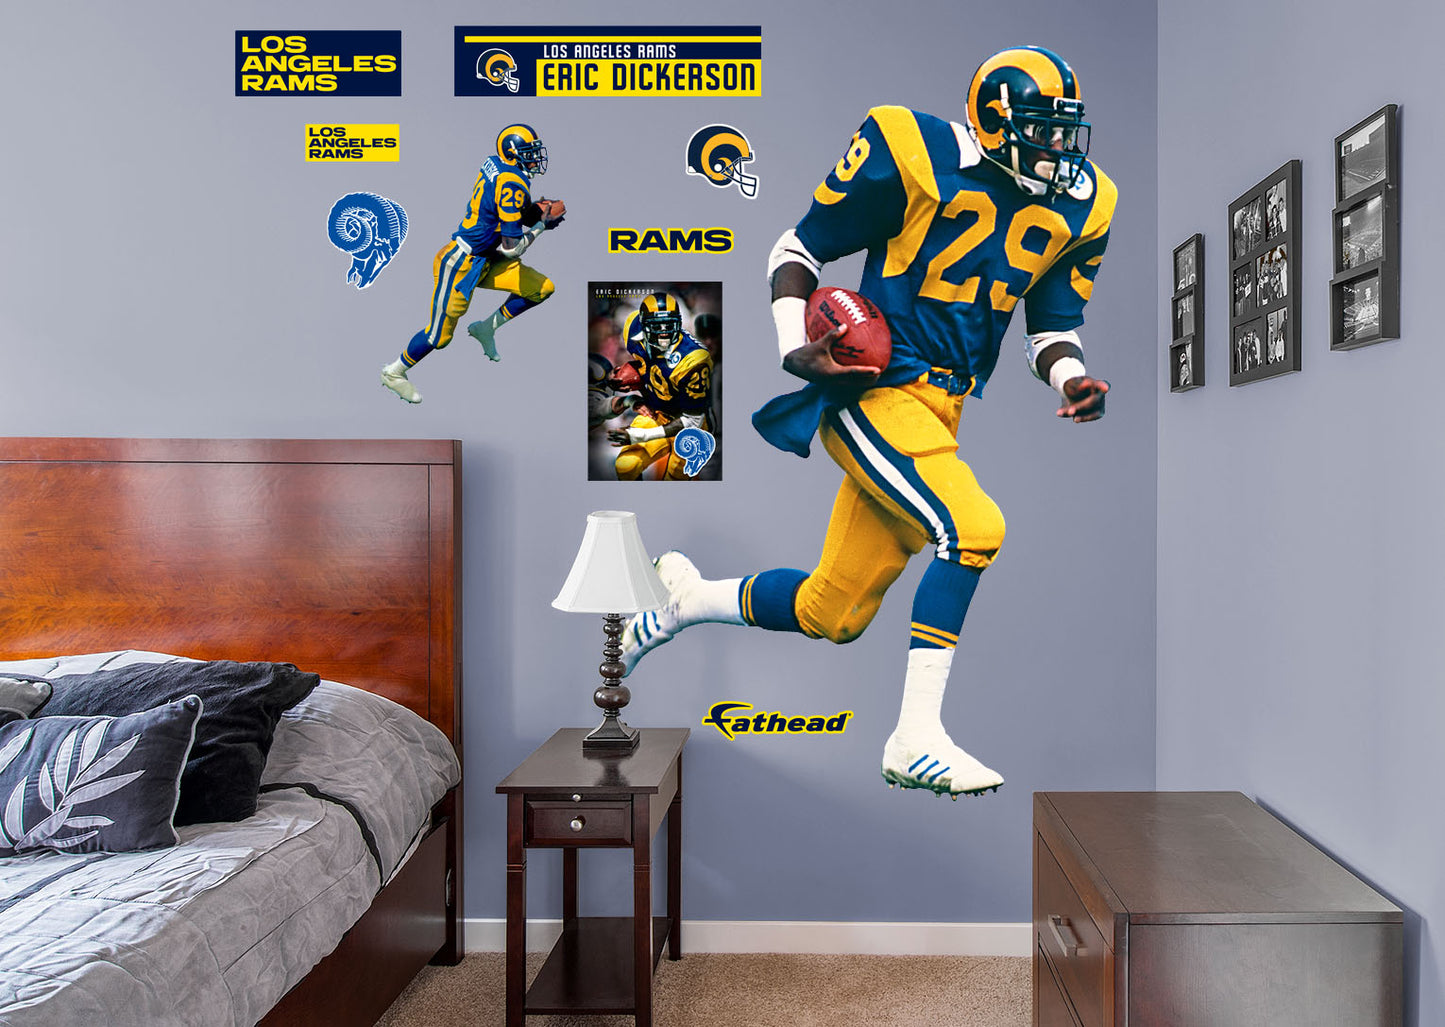 Los Angeles Rams: Eric Dickerson 2021 Legend        - Officially Licensed NFL Removable Wall   Adhesive Decal